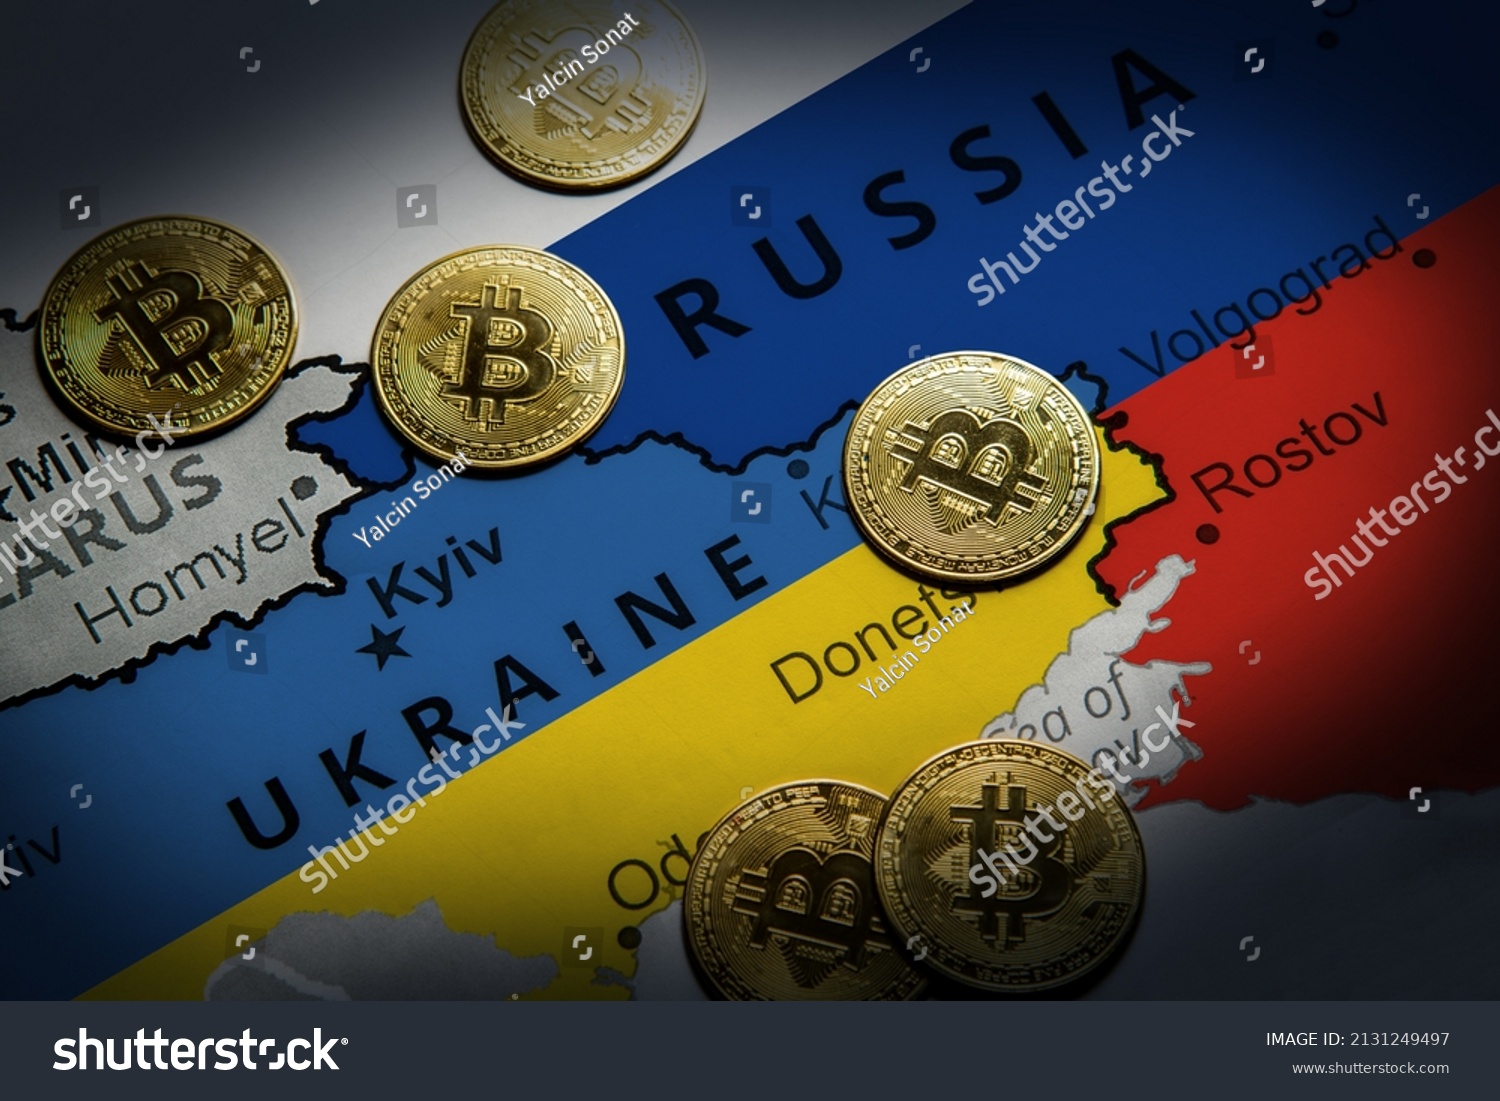 Cryptocurrency standing on the map of Russia and Ukraine. Concept of precaution against financial sanctions #2131249497